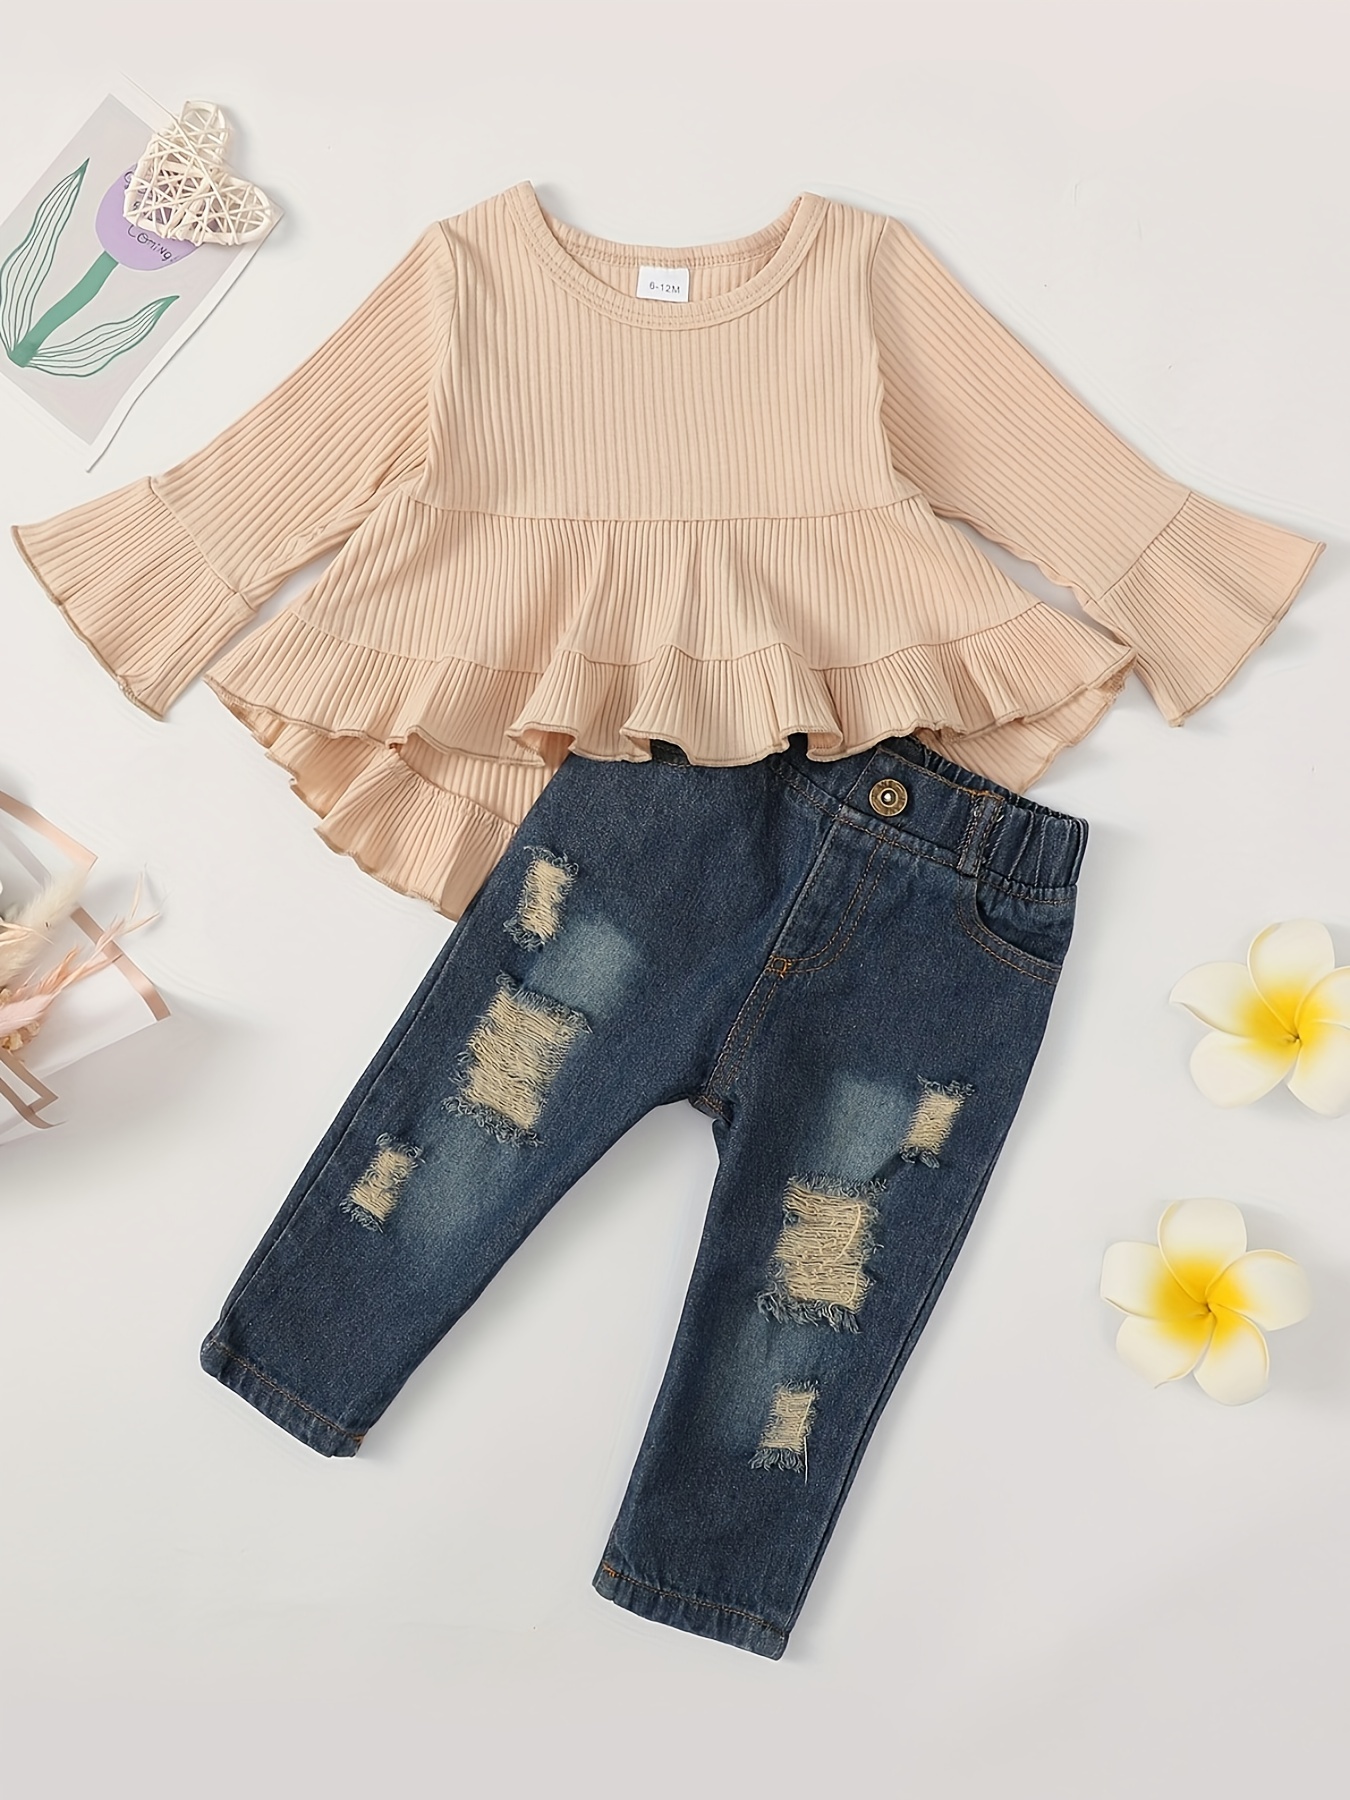 2-piece Kid Girl Floral Print Long Bell sleeves Peplum Top and Patchwork Denim Jeans Set